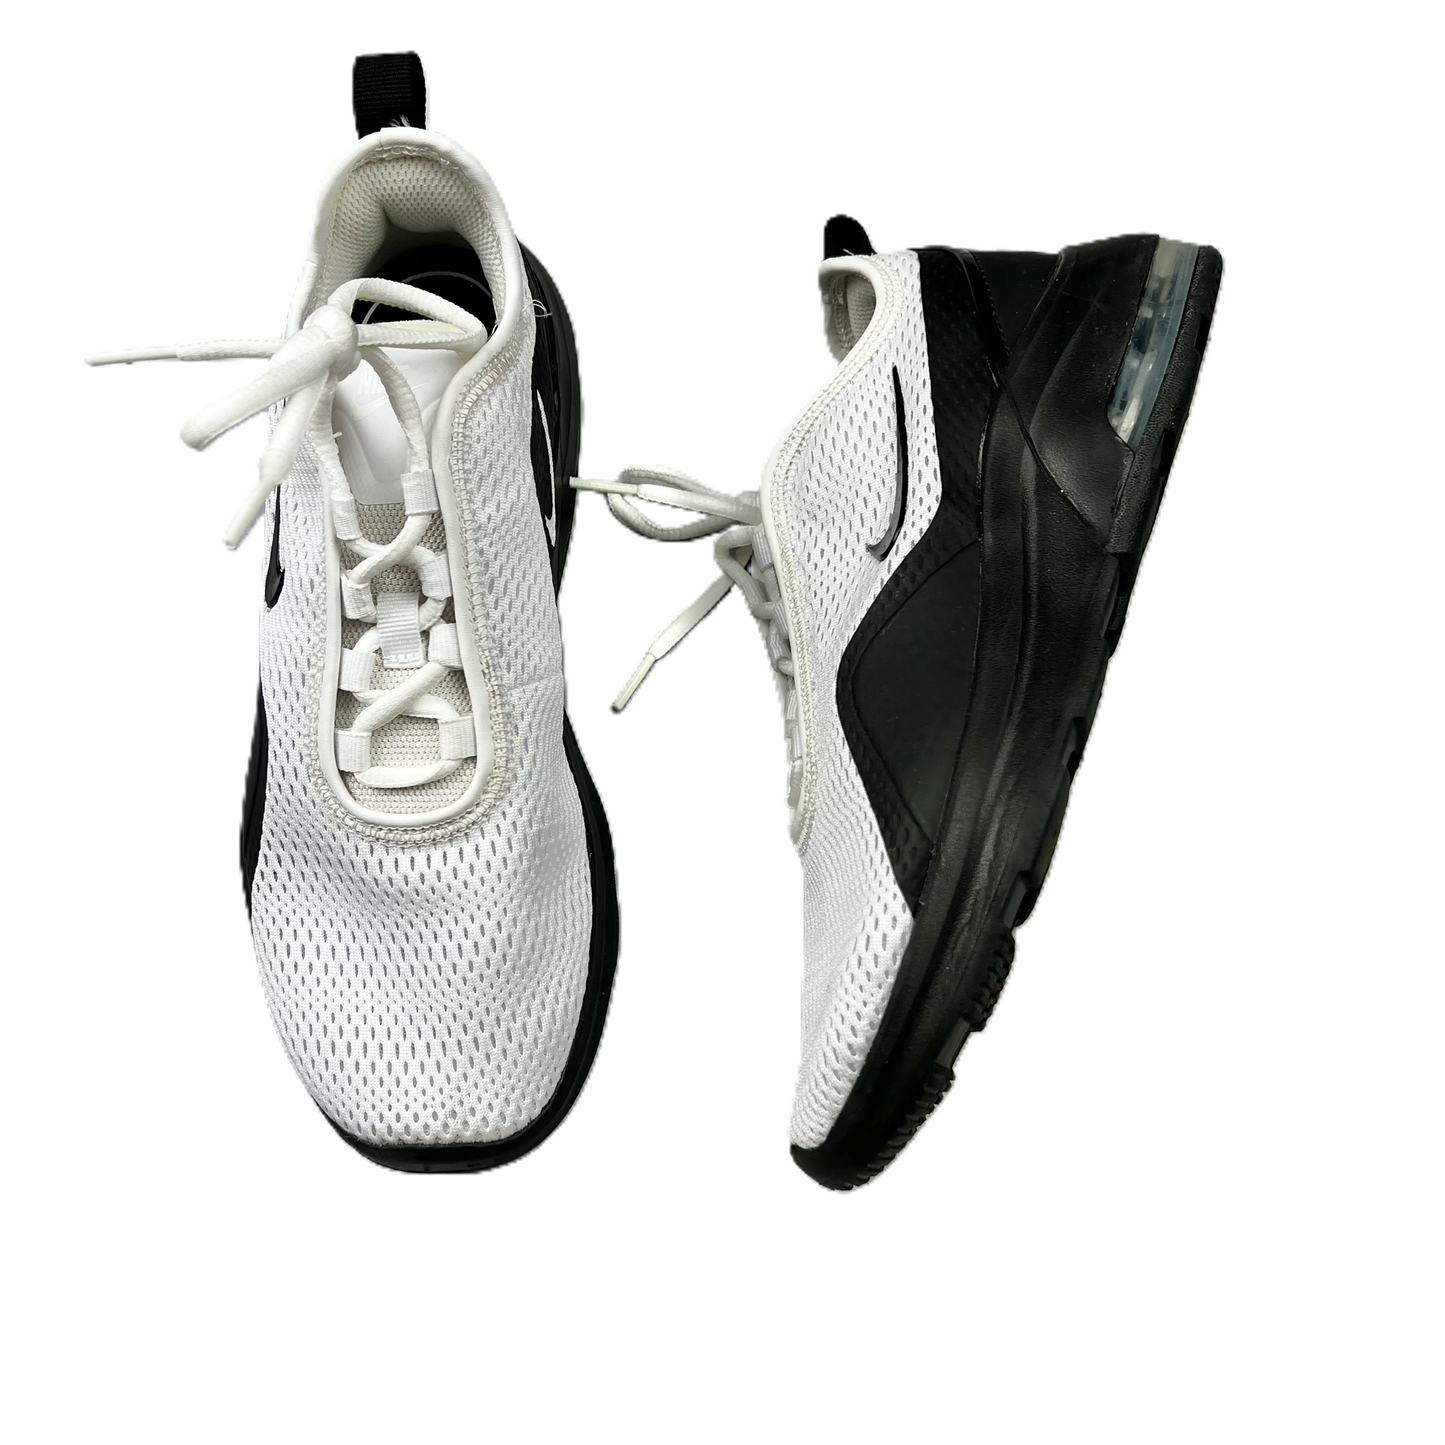 Black & White Shoes Athletic By Nike, Size: 8